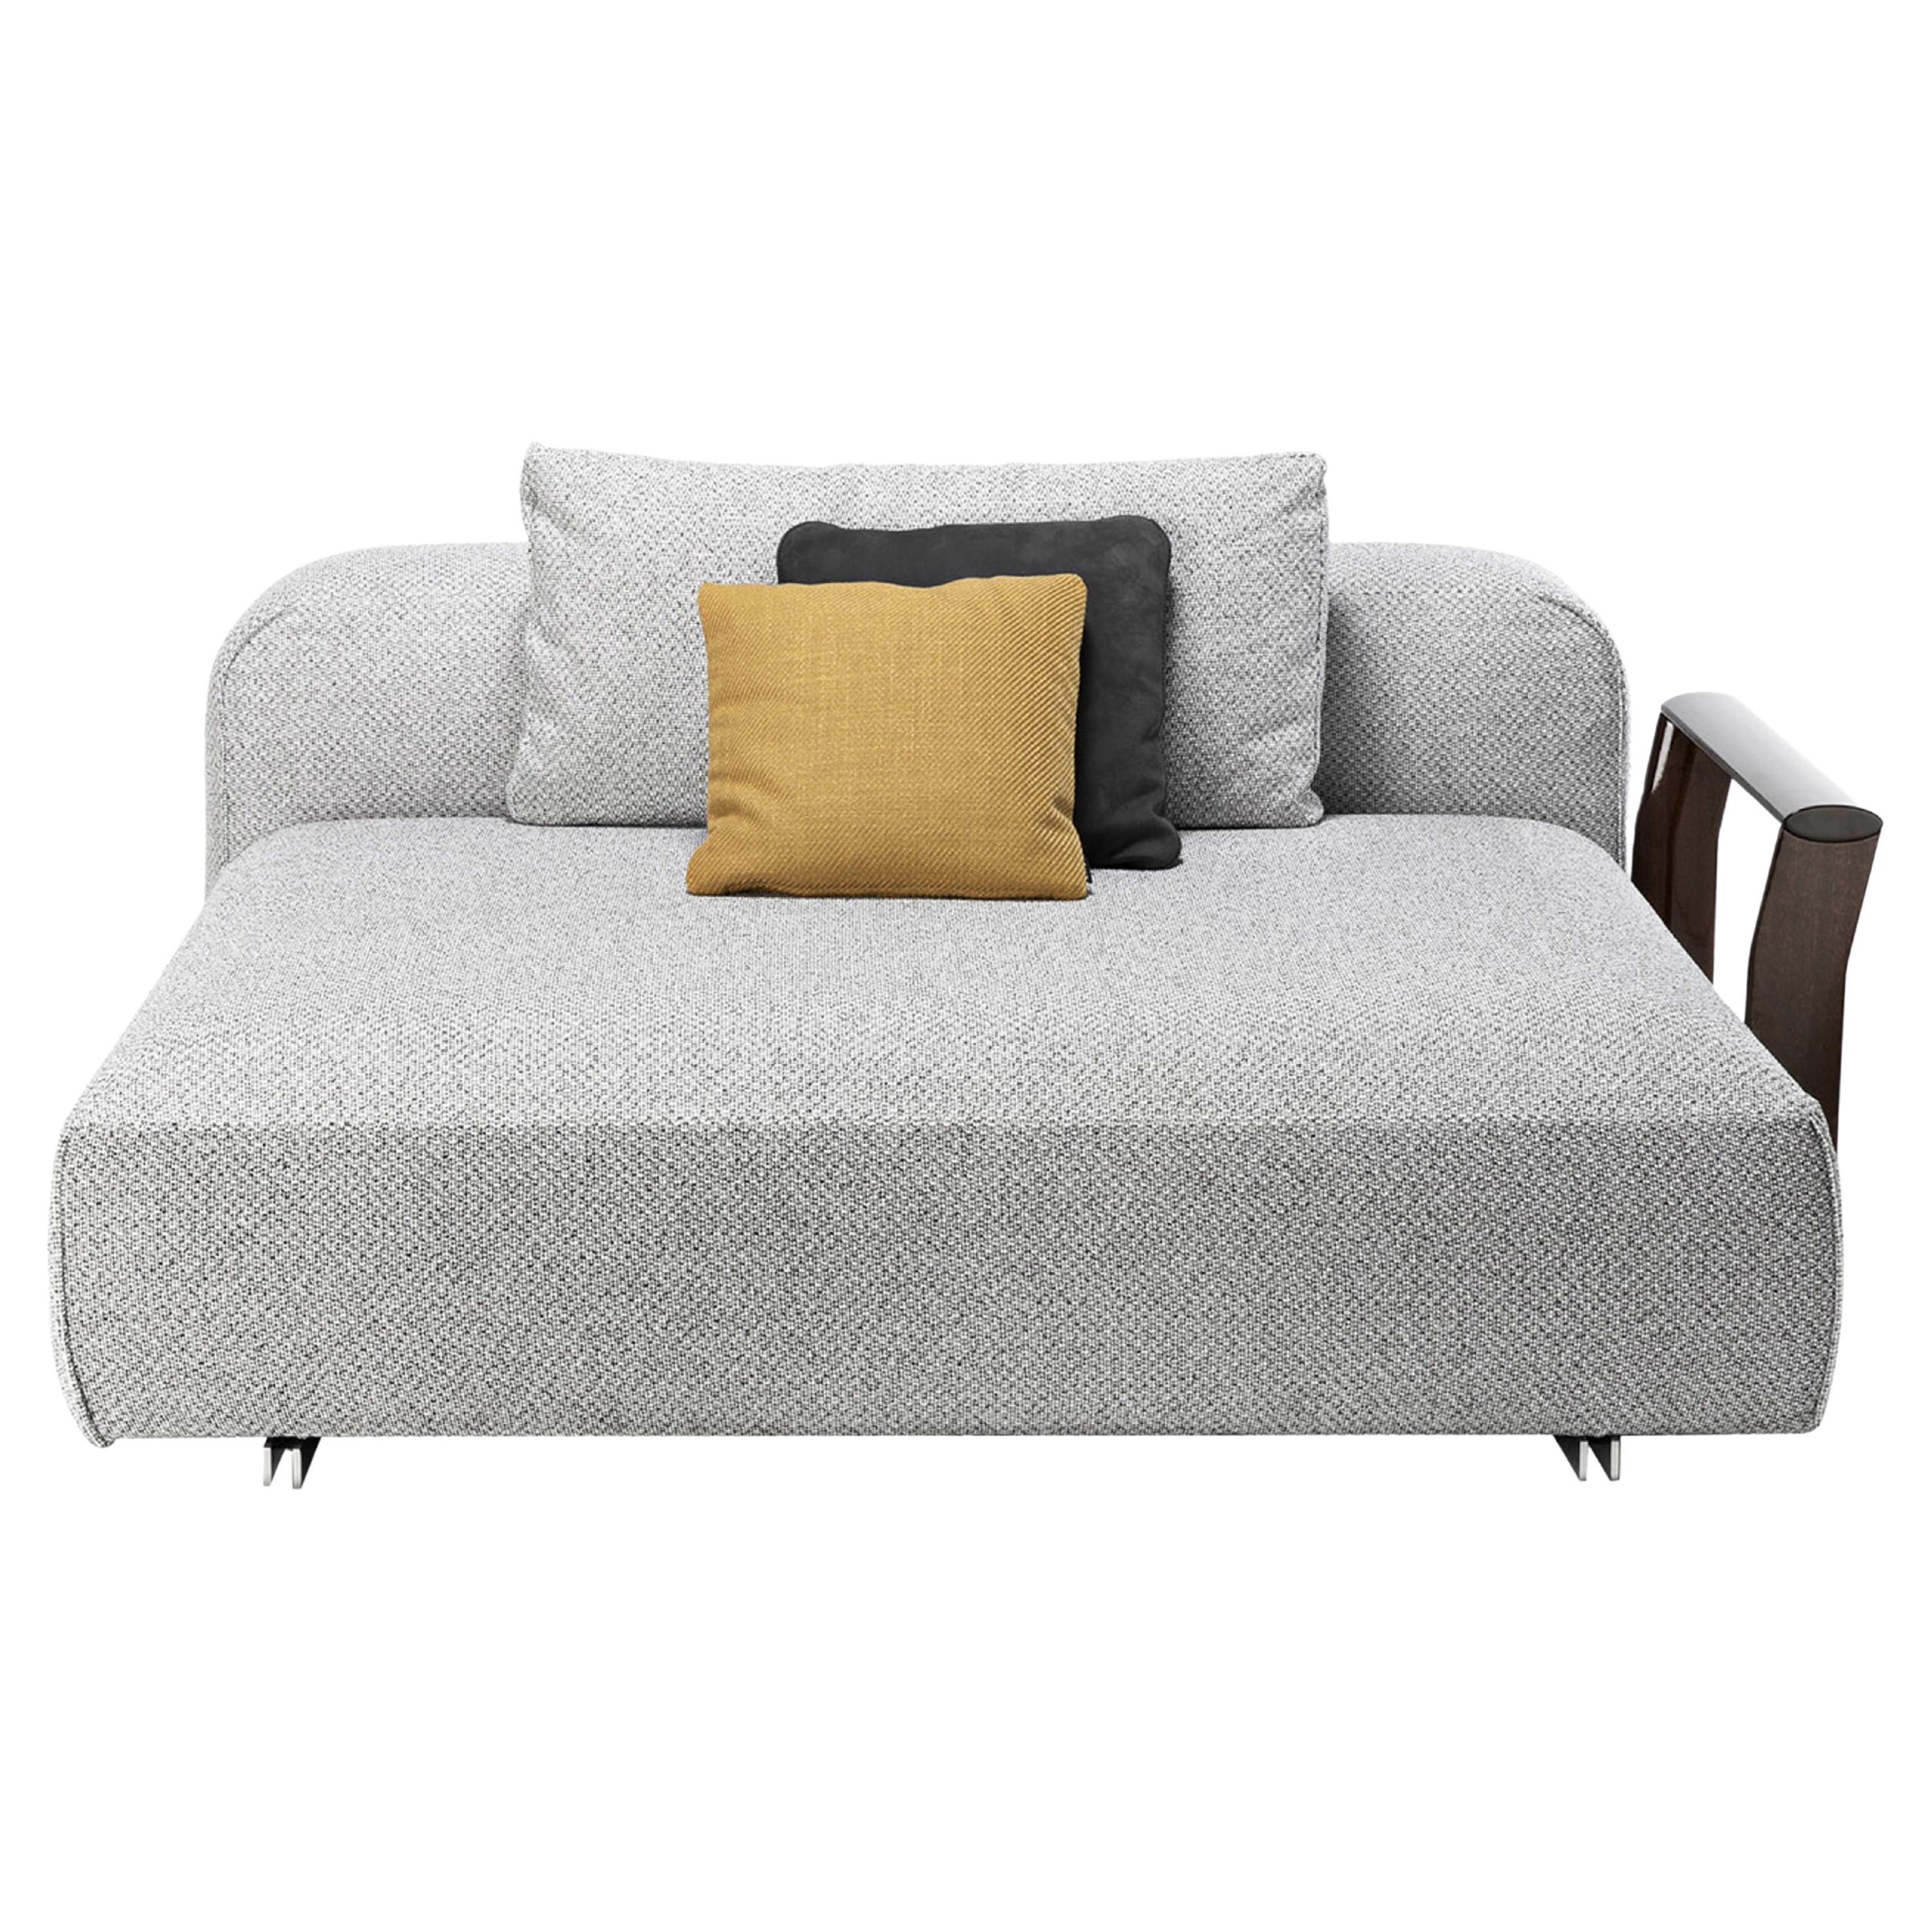 Elba Modular Barrique + Gray Lounge Seat by Massimo Castagna For Sale